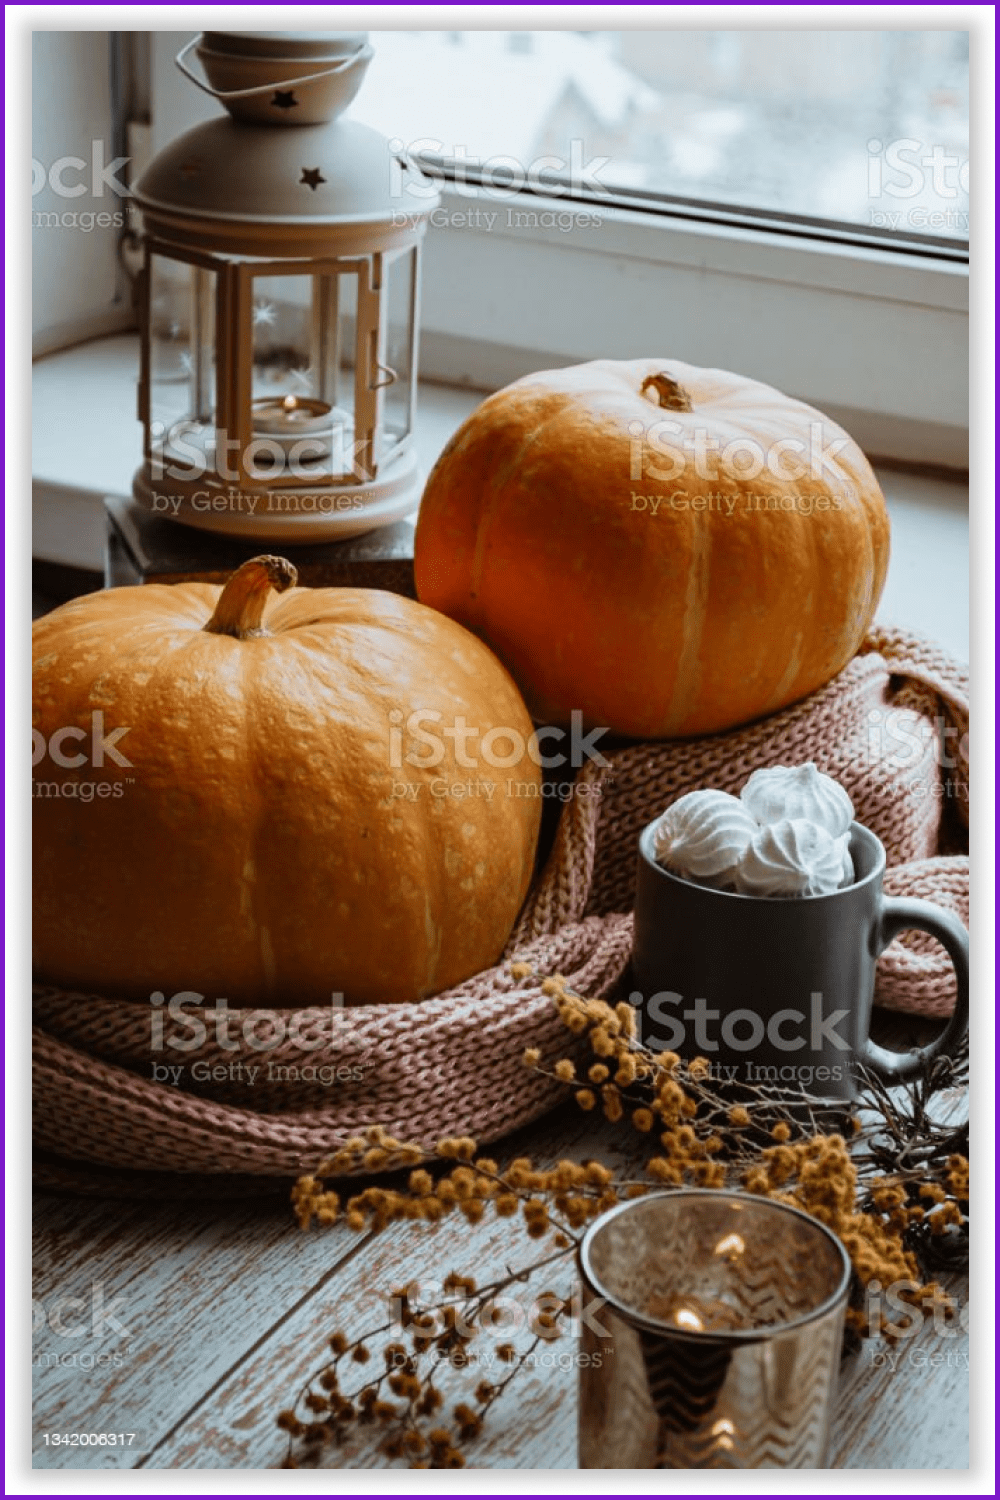 Orange pumpkins with cups, candlesticks and a scarf on the table.